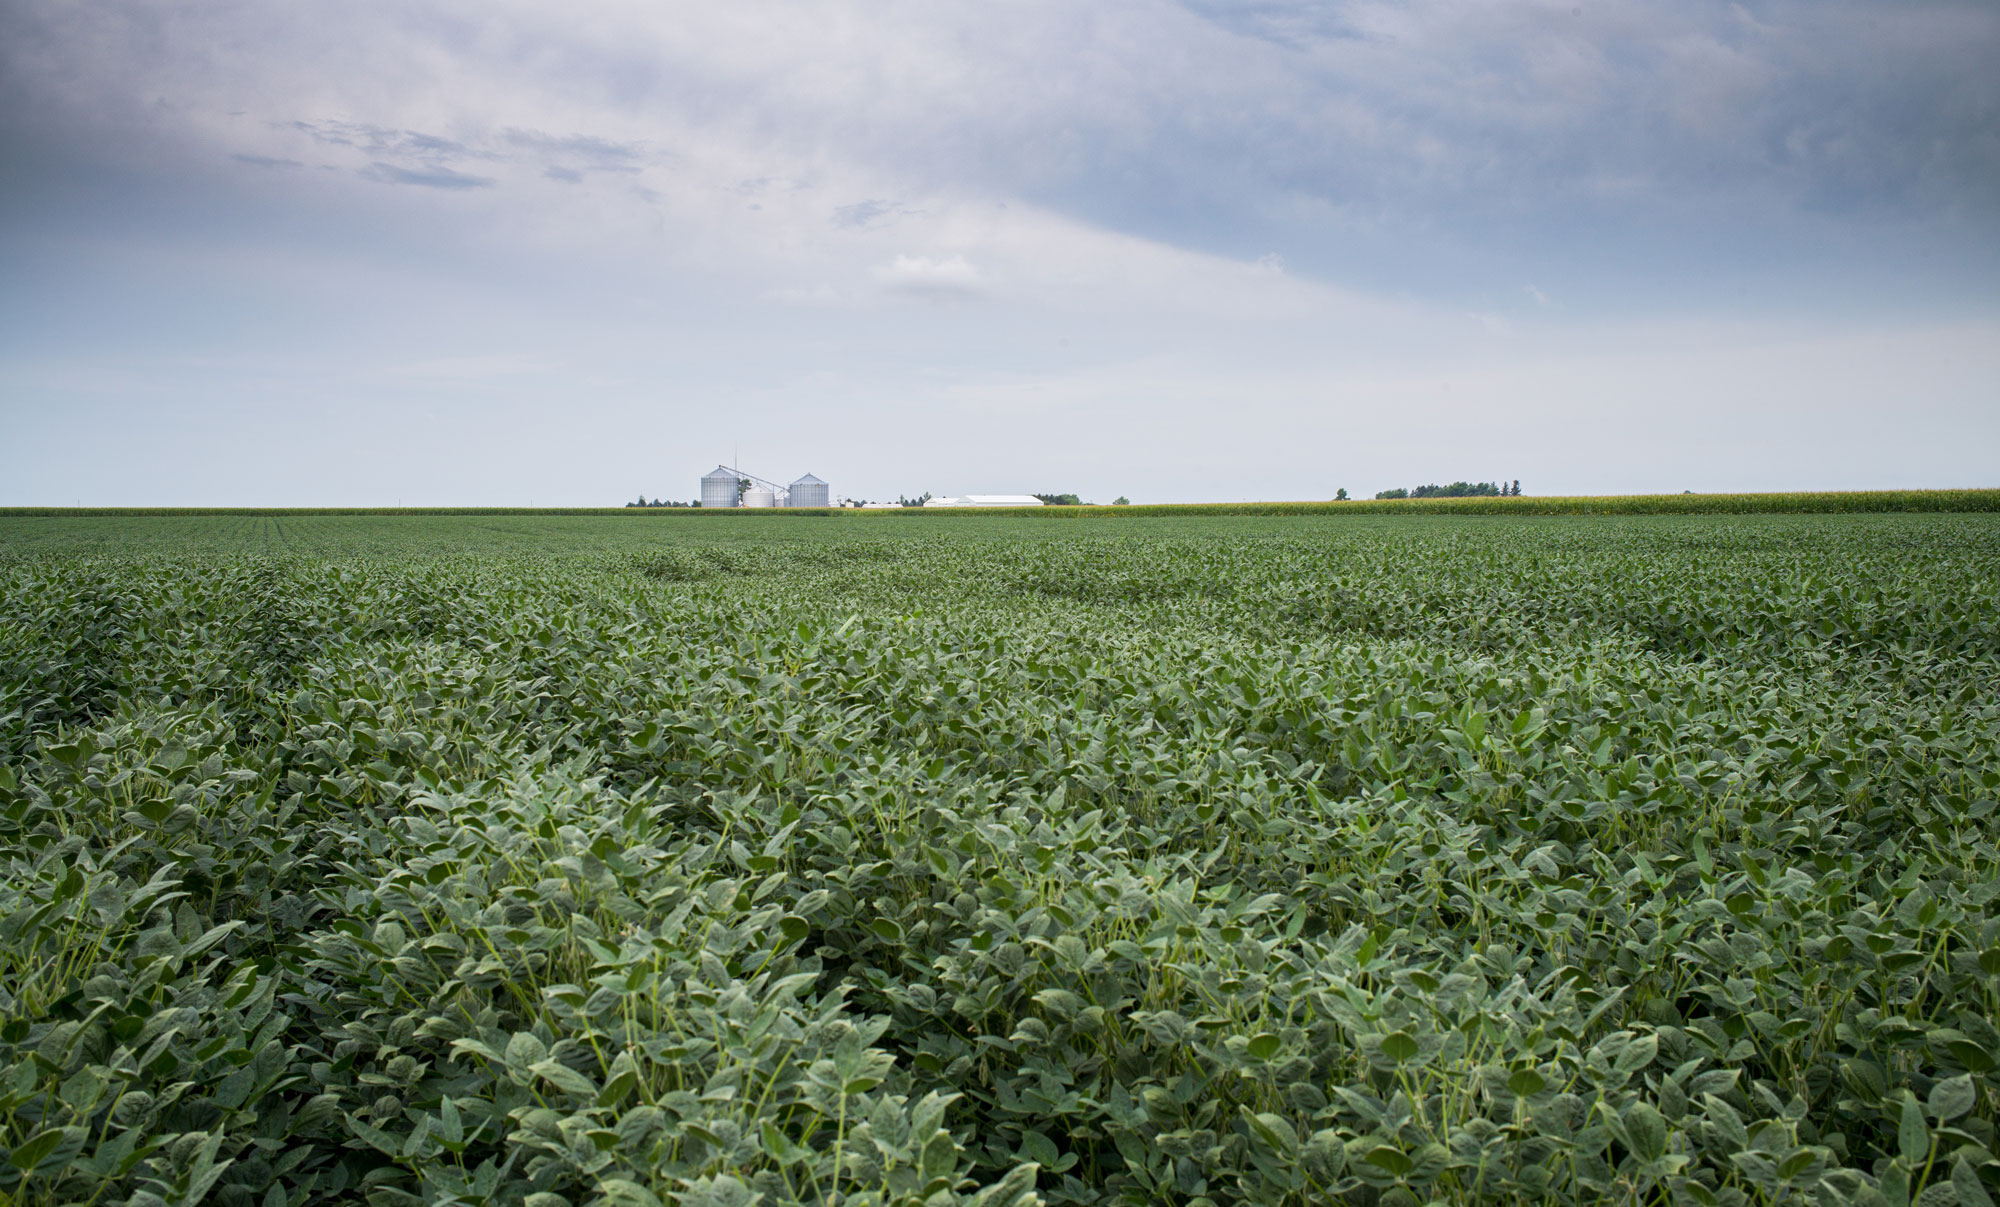 Photograph of a soybean field in Illinois taken in the summer. The photo shows a flat field of green soybean plants arranged in rows. A cluster of buildings can be seen on the horizon.